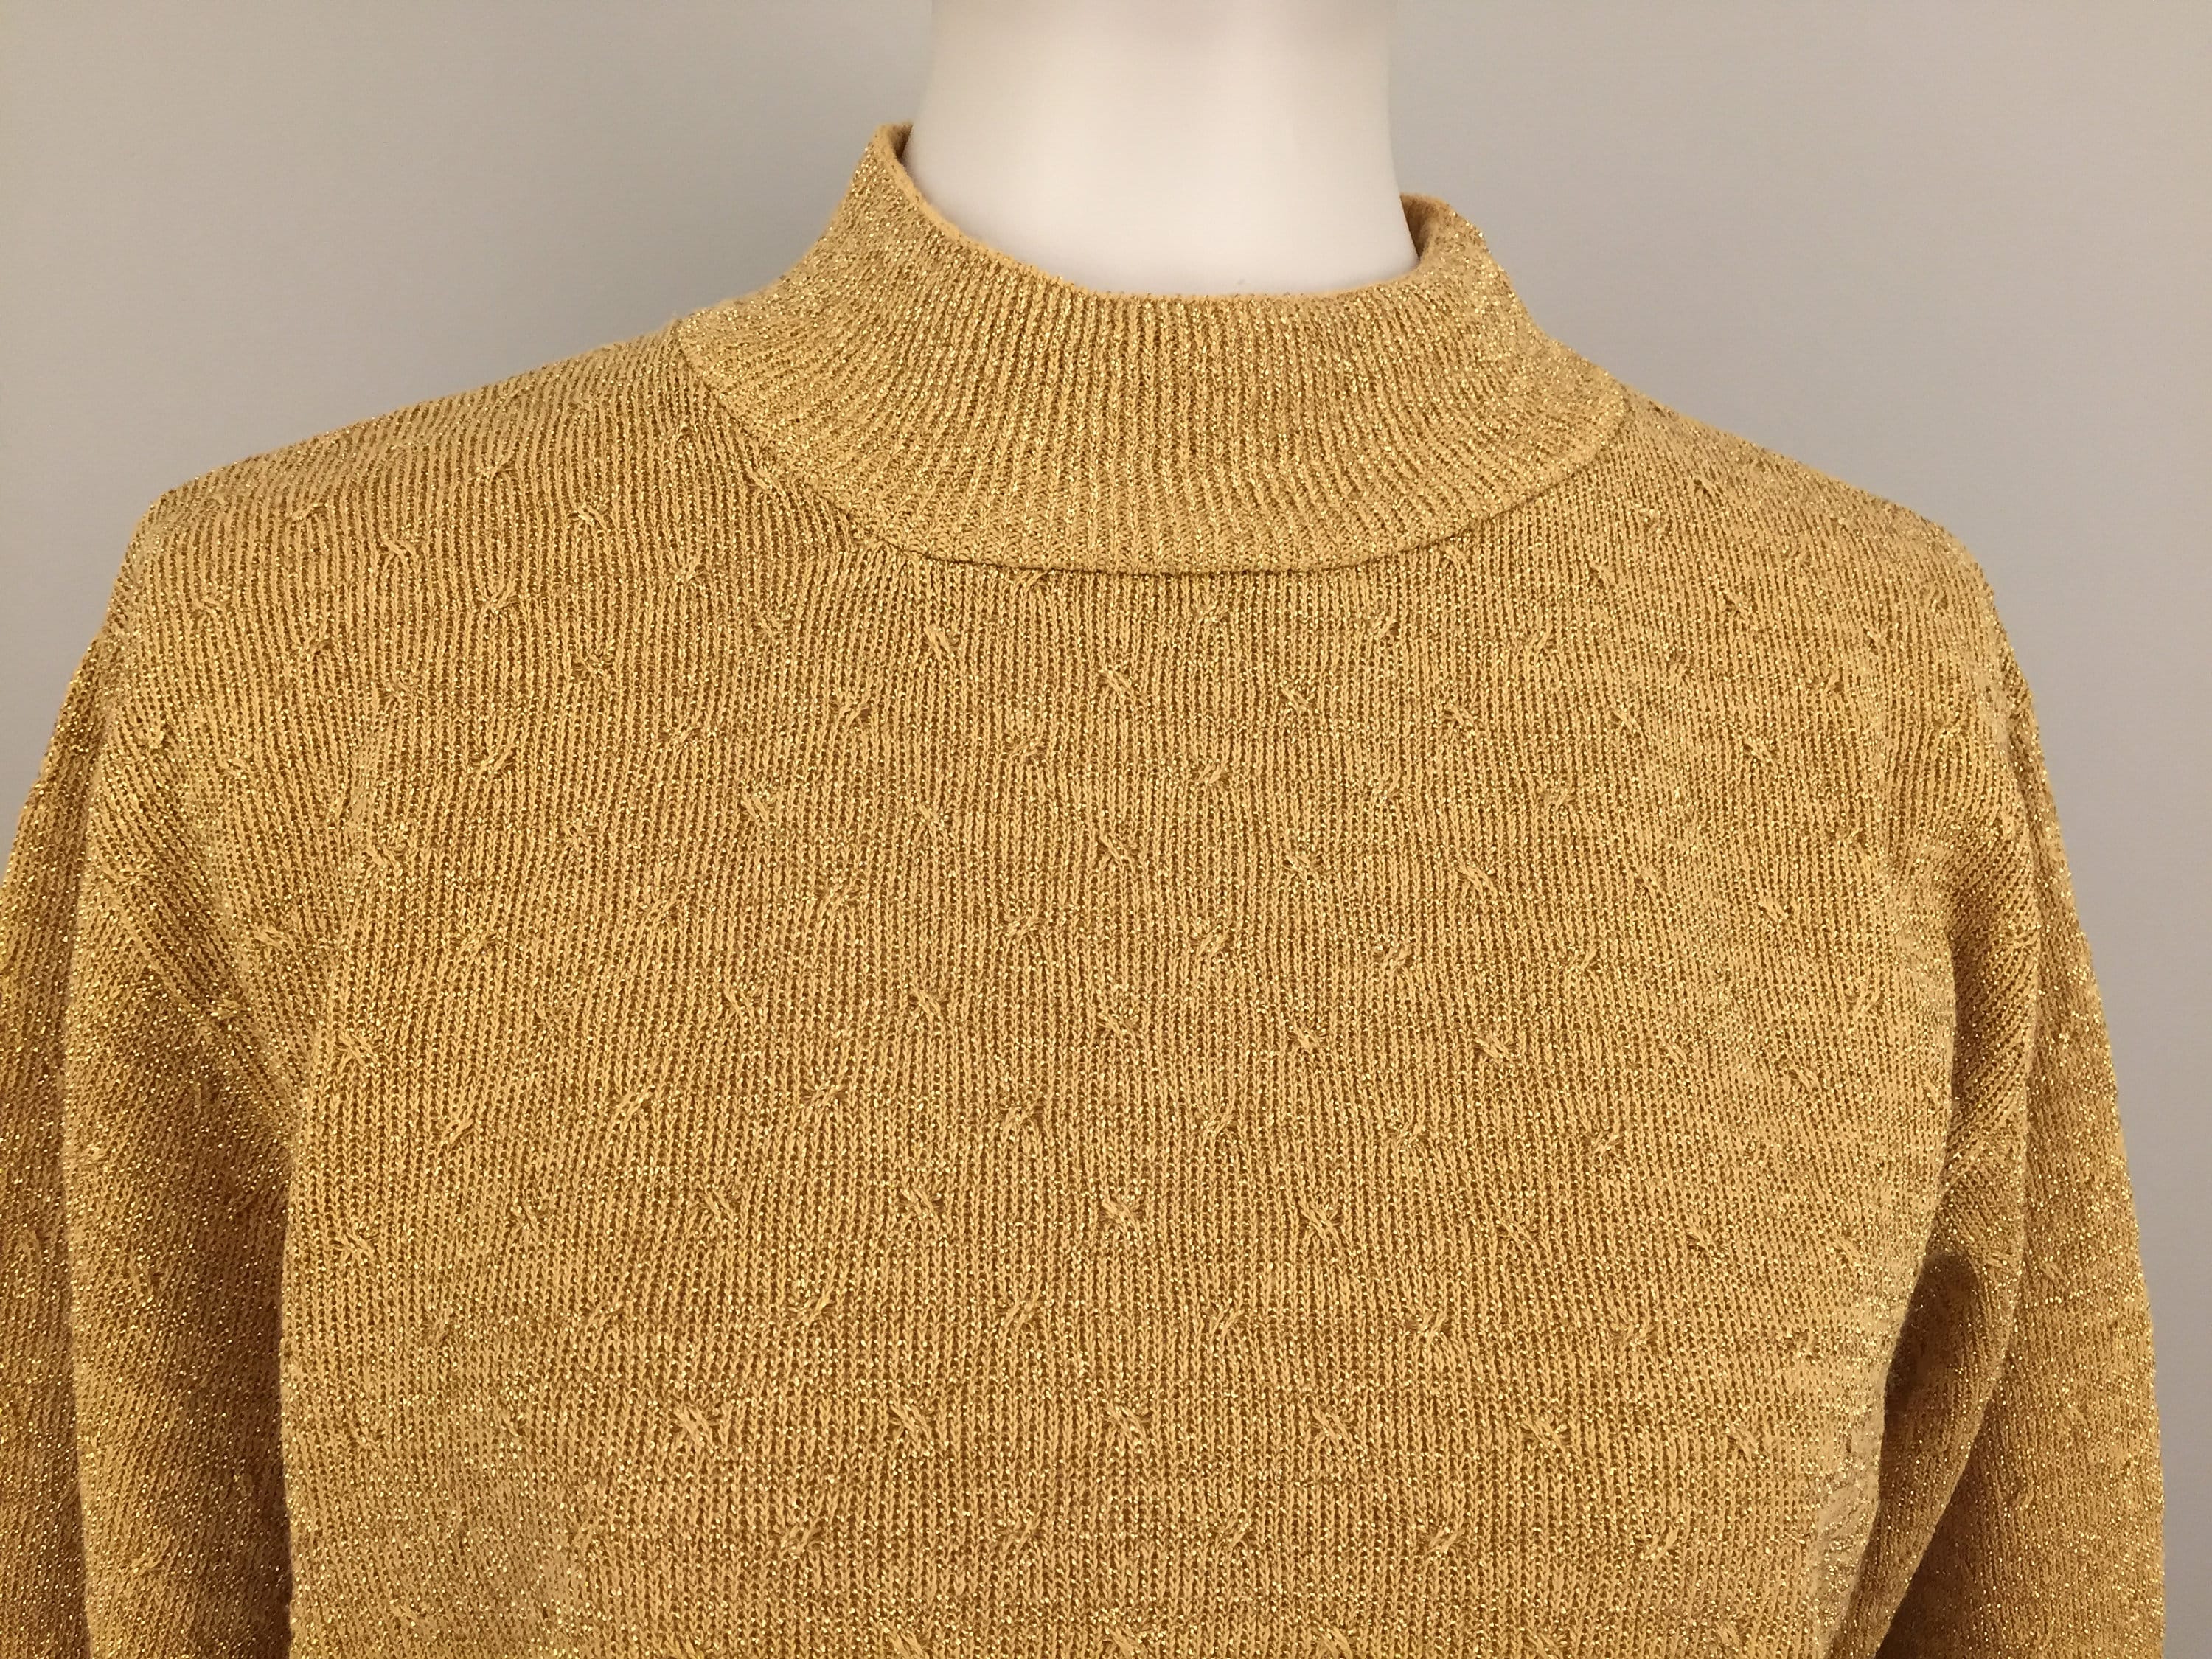 Gold Metallic Sweater Sparkly Top Mock Neck Turtleneck Party | Etsy